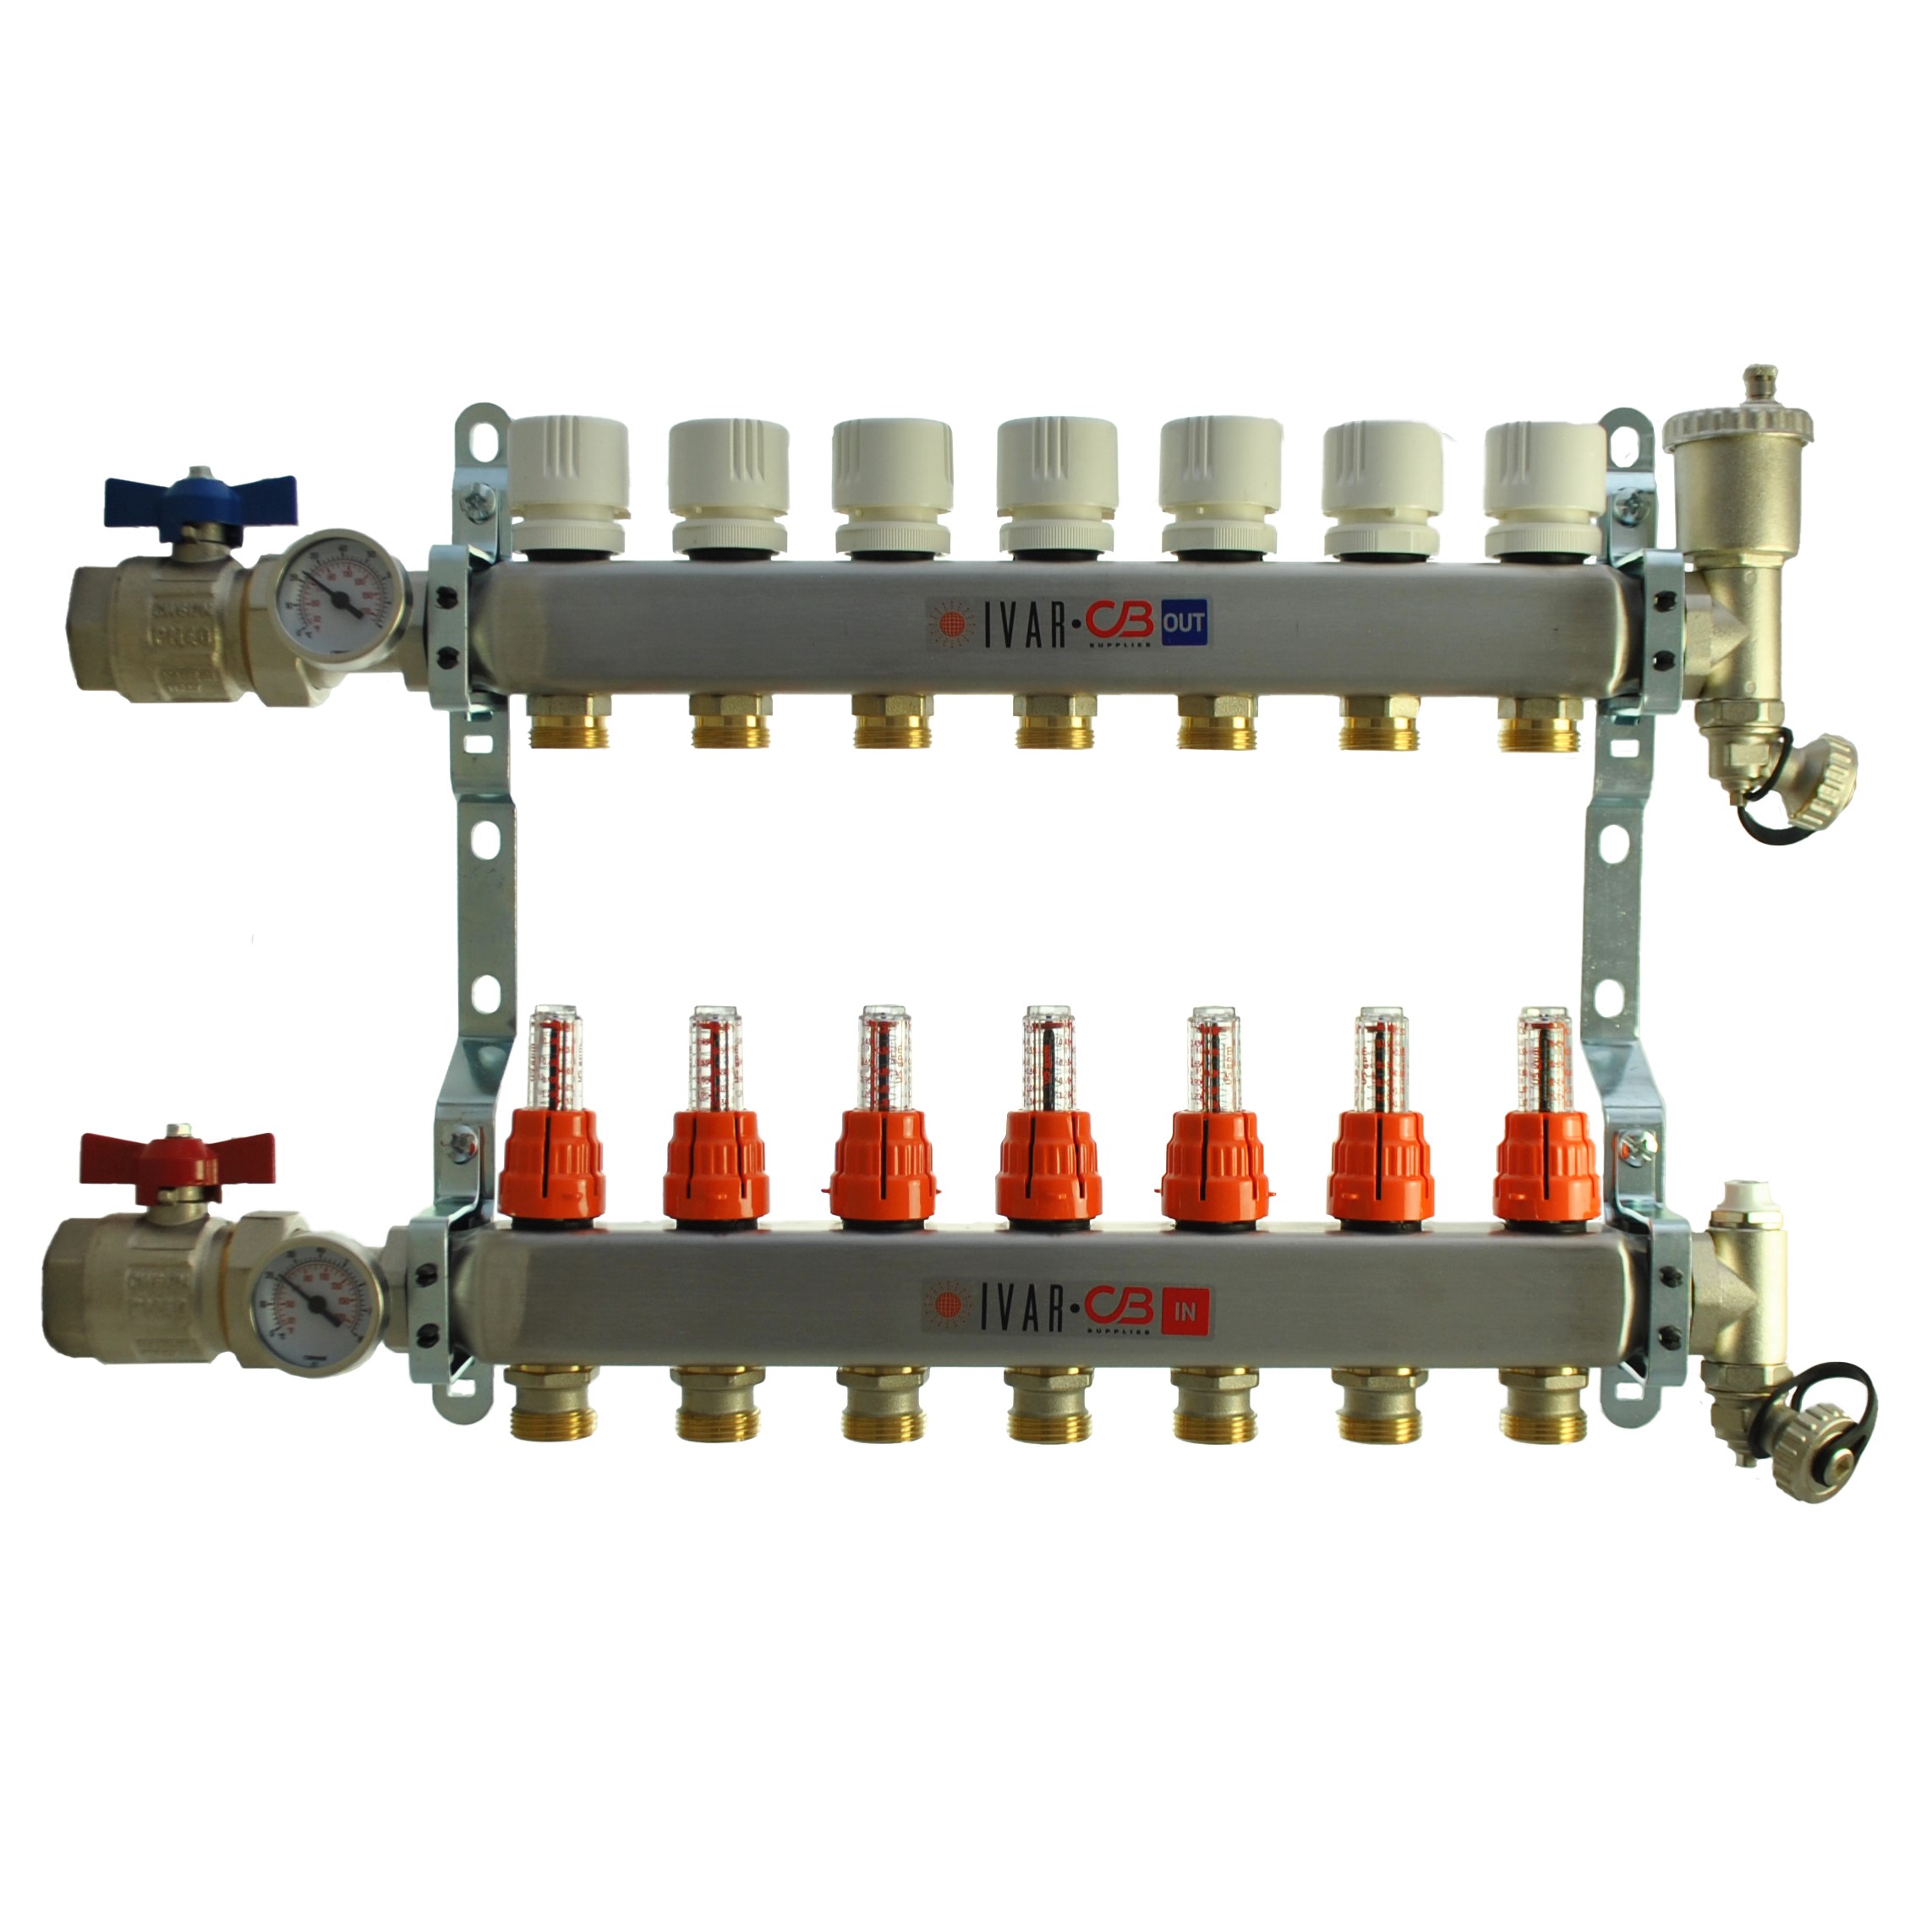 1" IVAR Stainless Steel Hydronic Manifold for Radiant Floor Heating - 7 ports